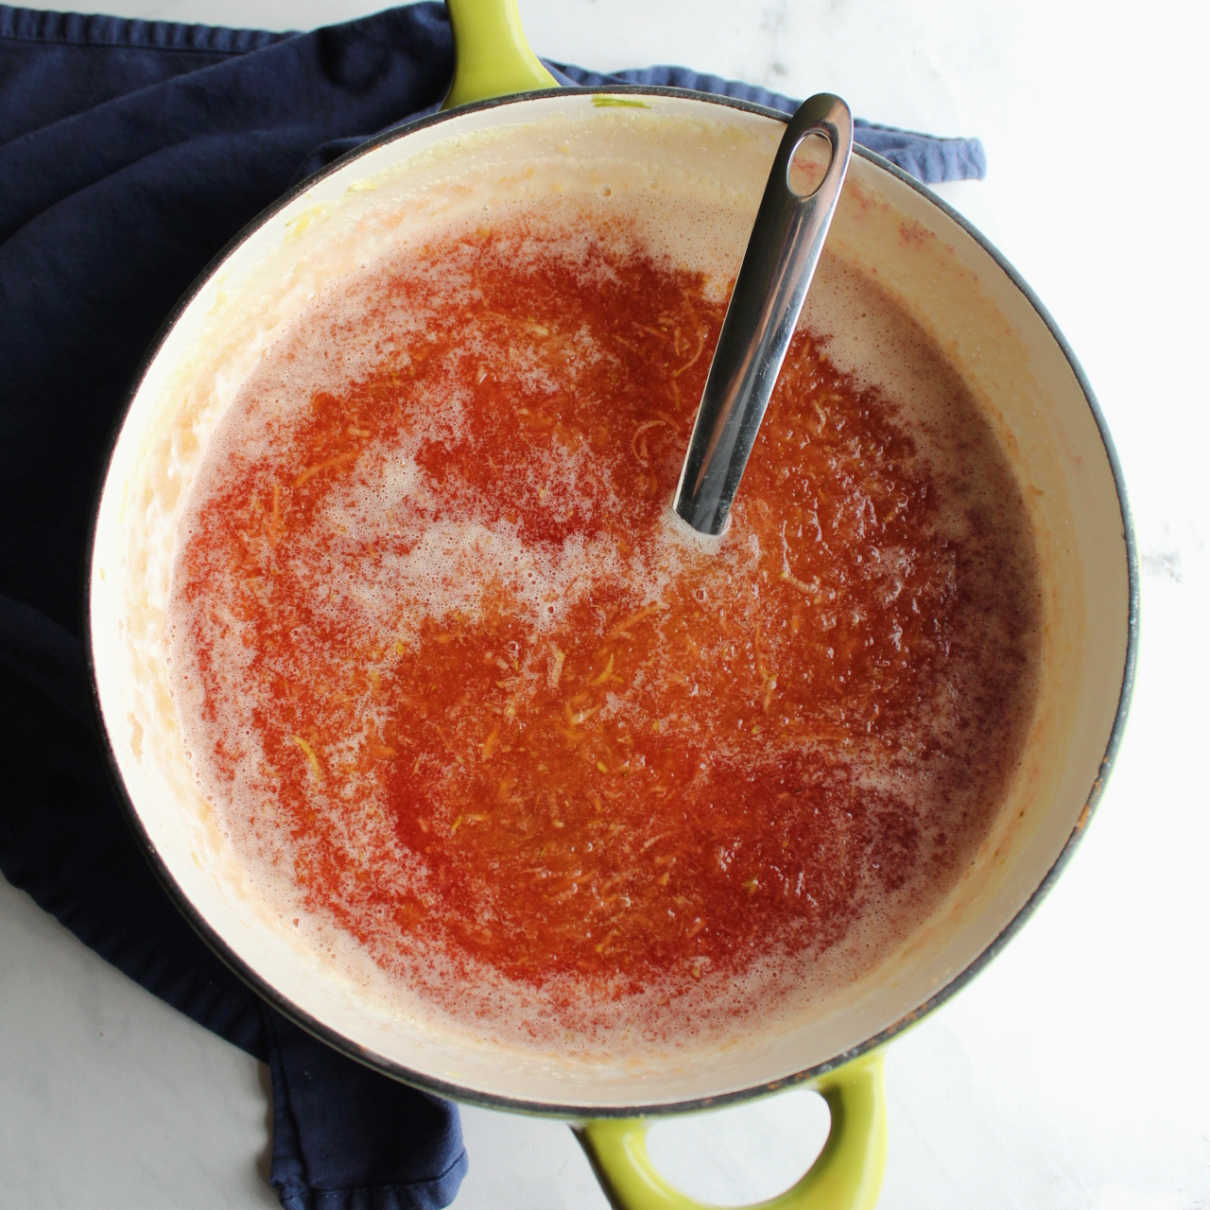 Saucepan filled with reddish peach colored jam inside and ladle ready to scoop it into jars.